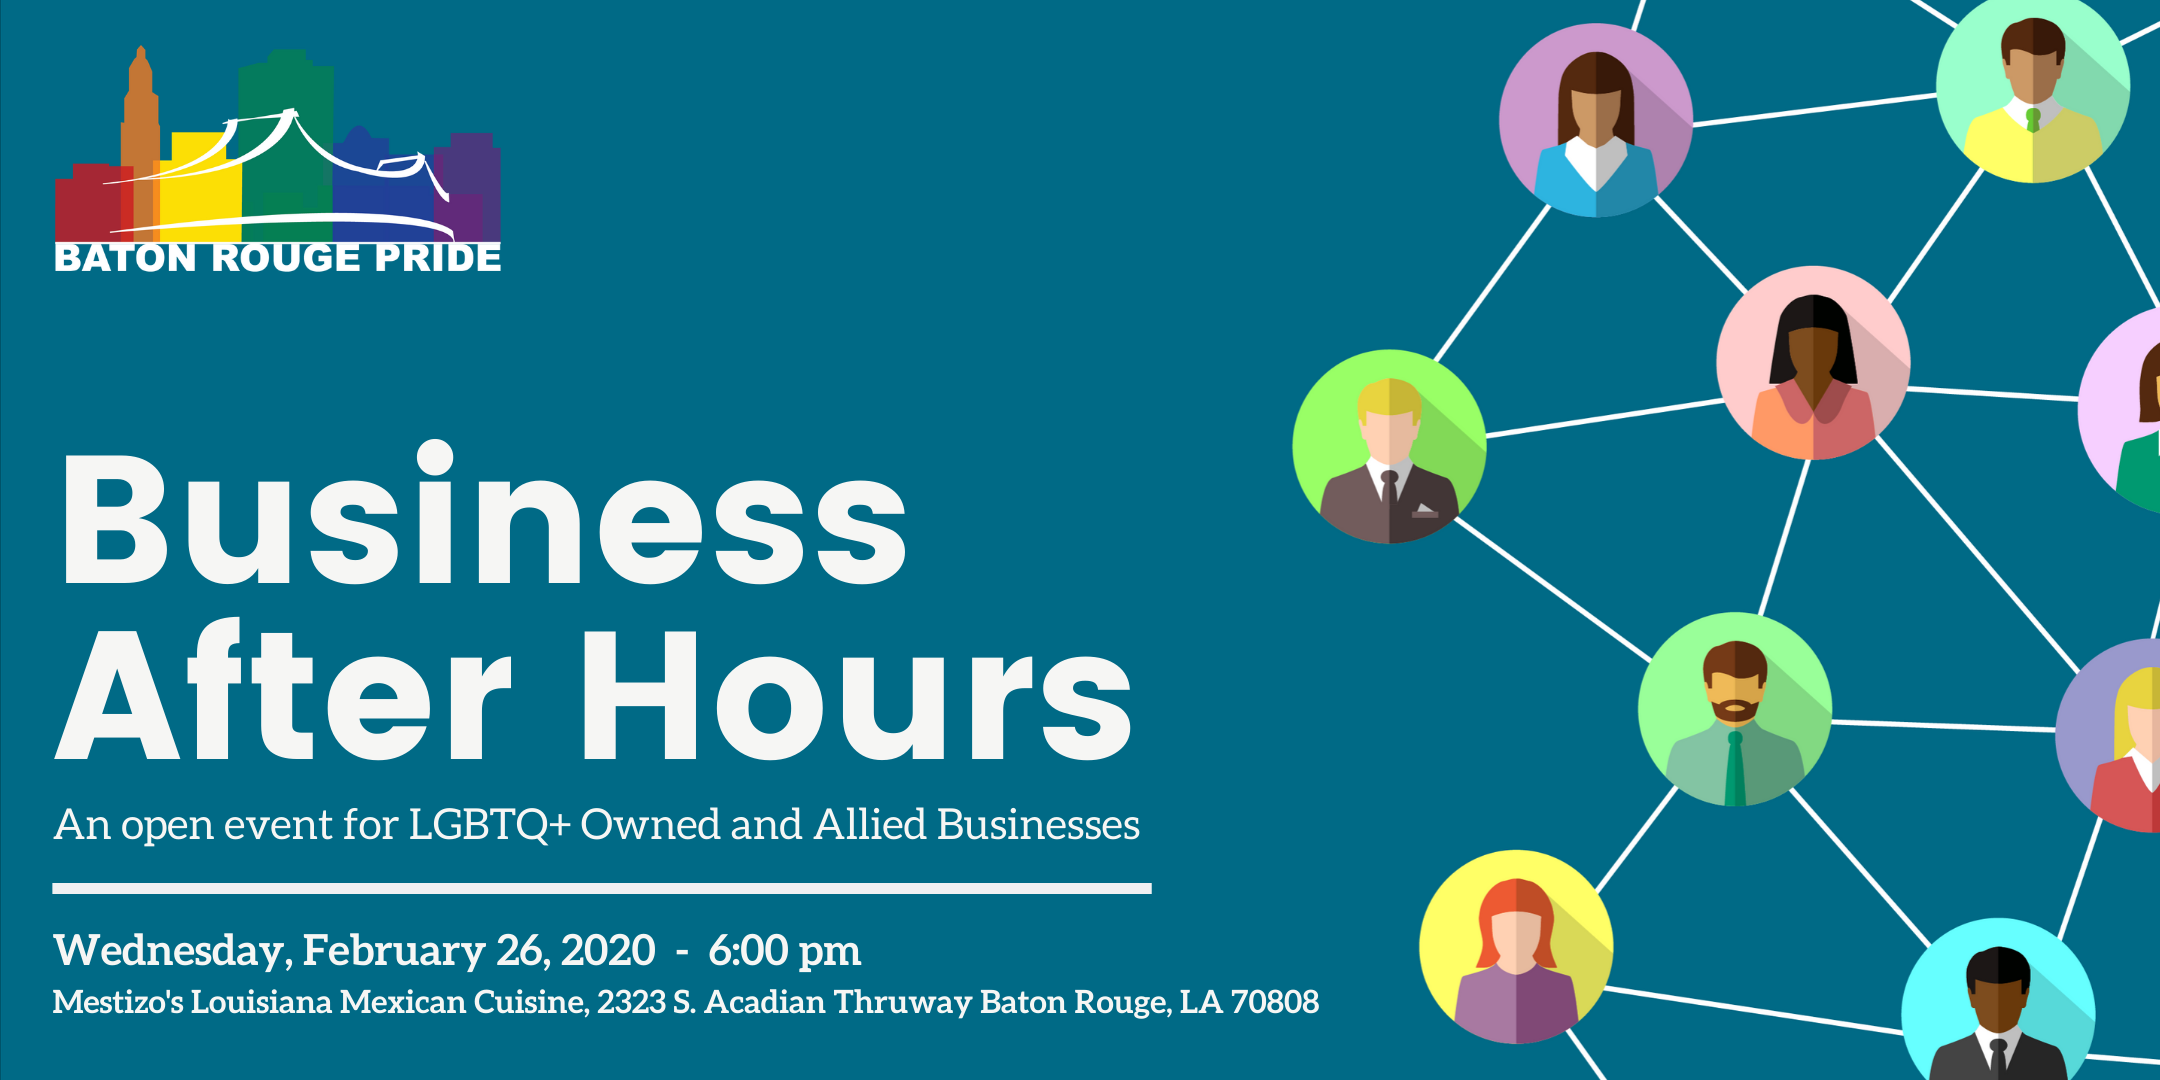 Business After Hours: An open event for LGBTQ+ Owned and Allied Businesses